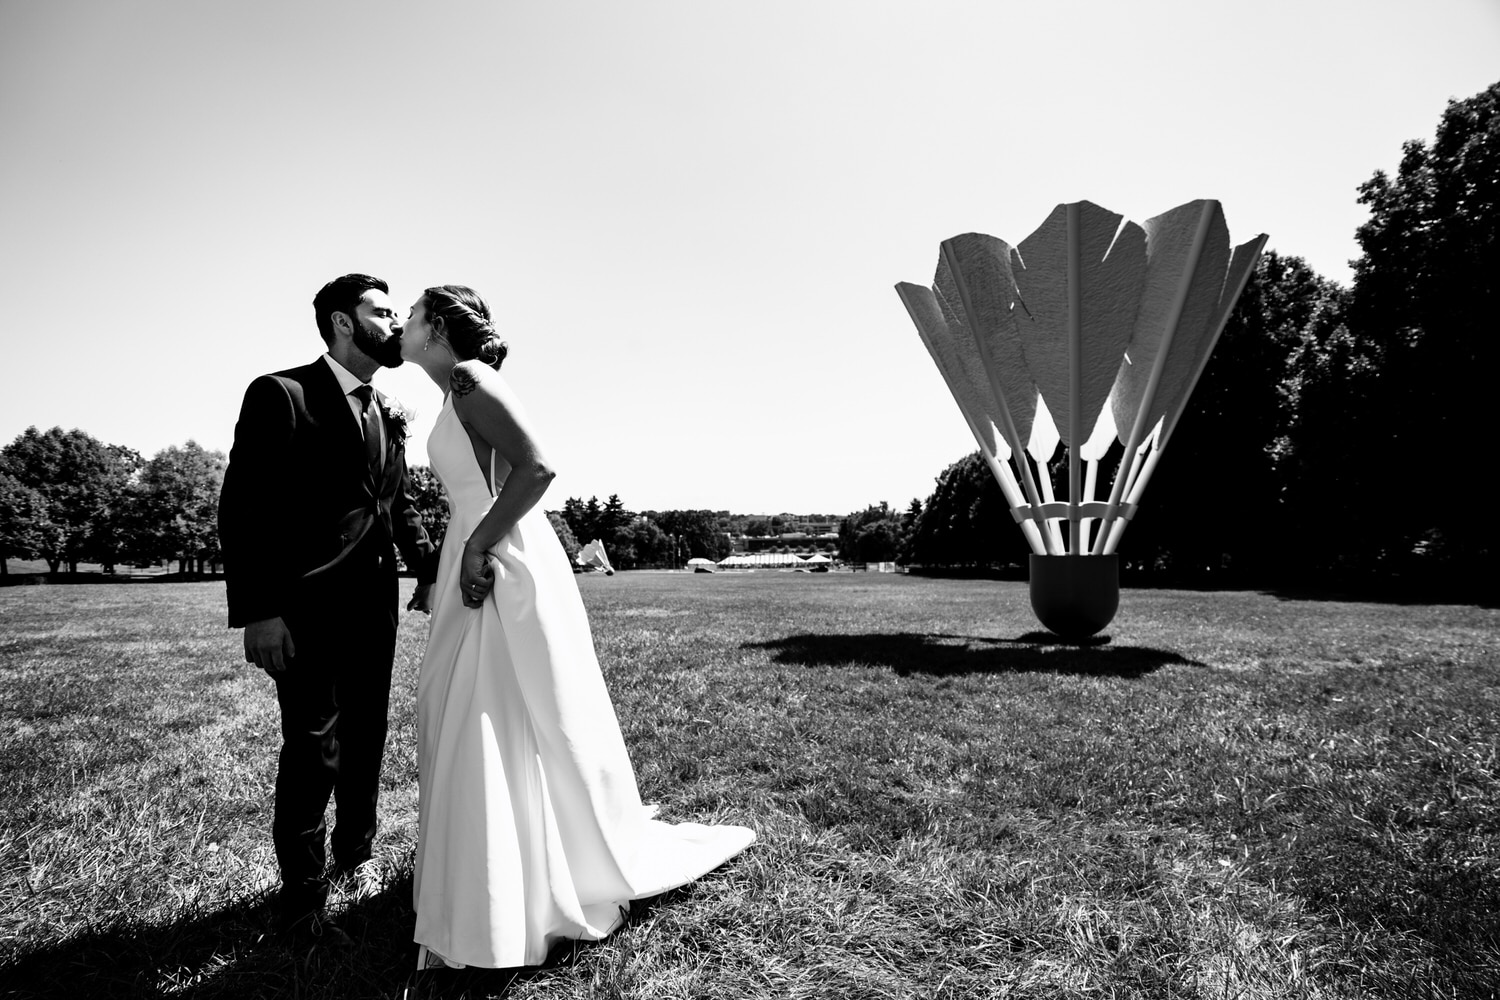 A candid black and white picture of a bride and groom leaning in to share a kiss, a giant shuttlecock visible on the grass behind them. 